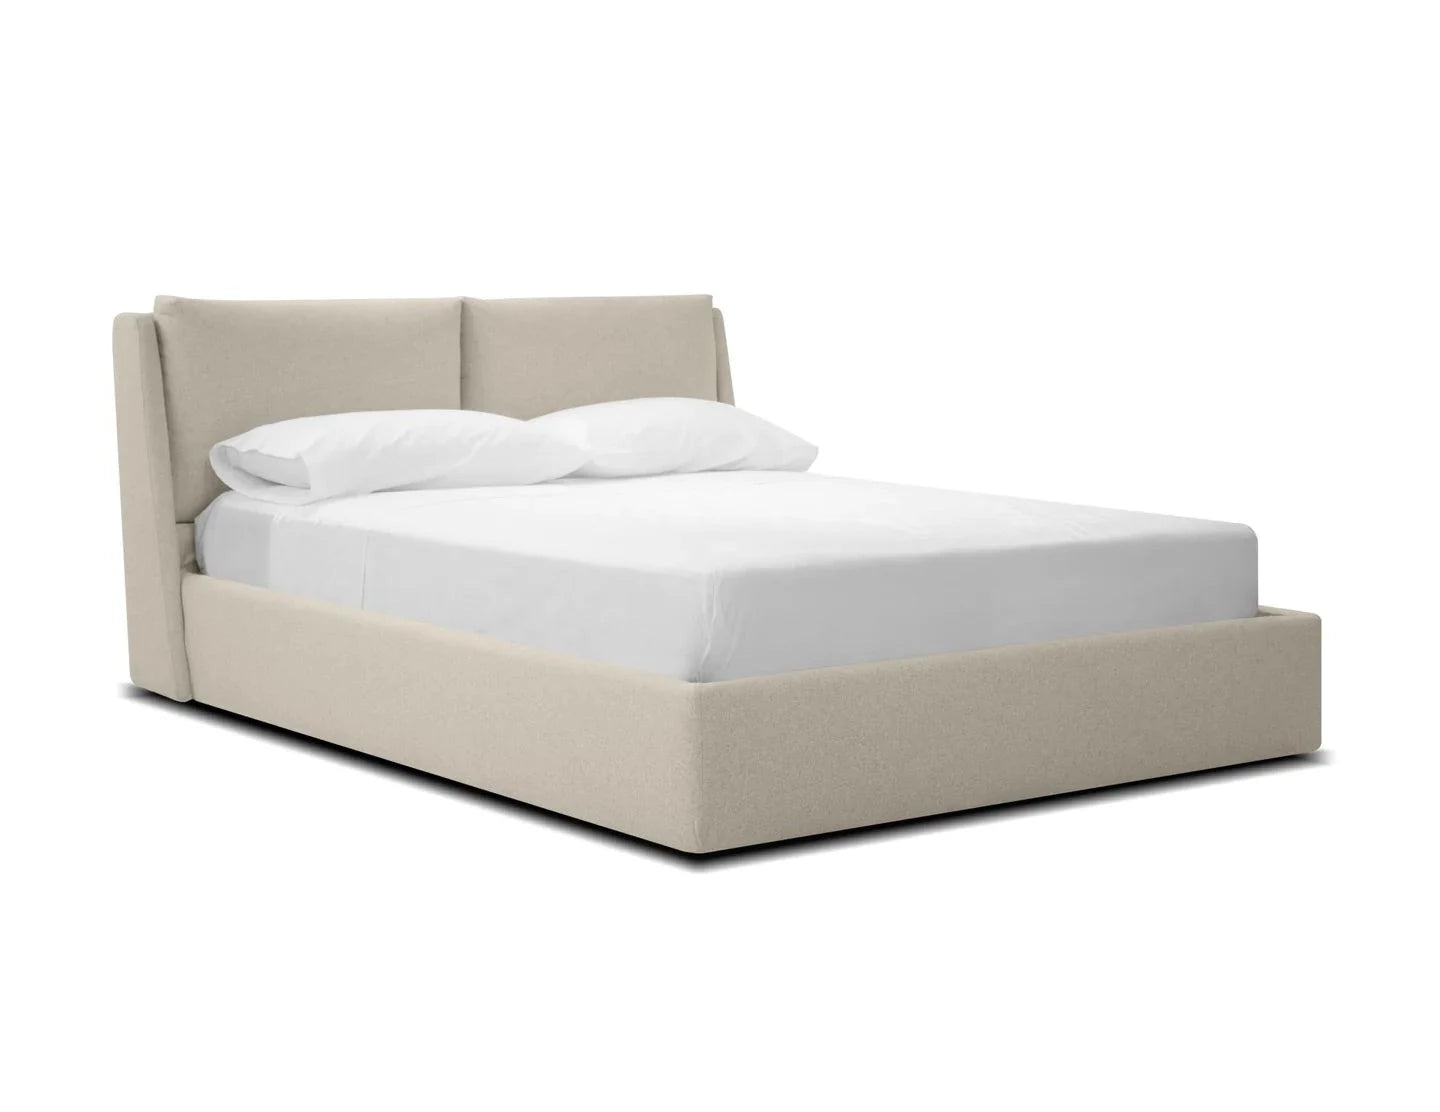 Continental Queen Storage Bed - Stone Wheat Tweed